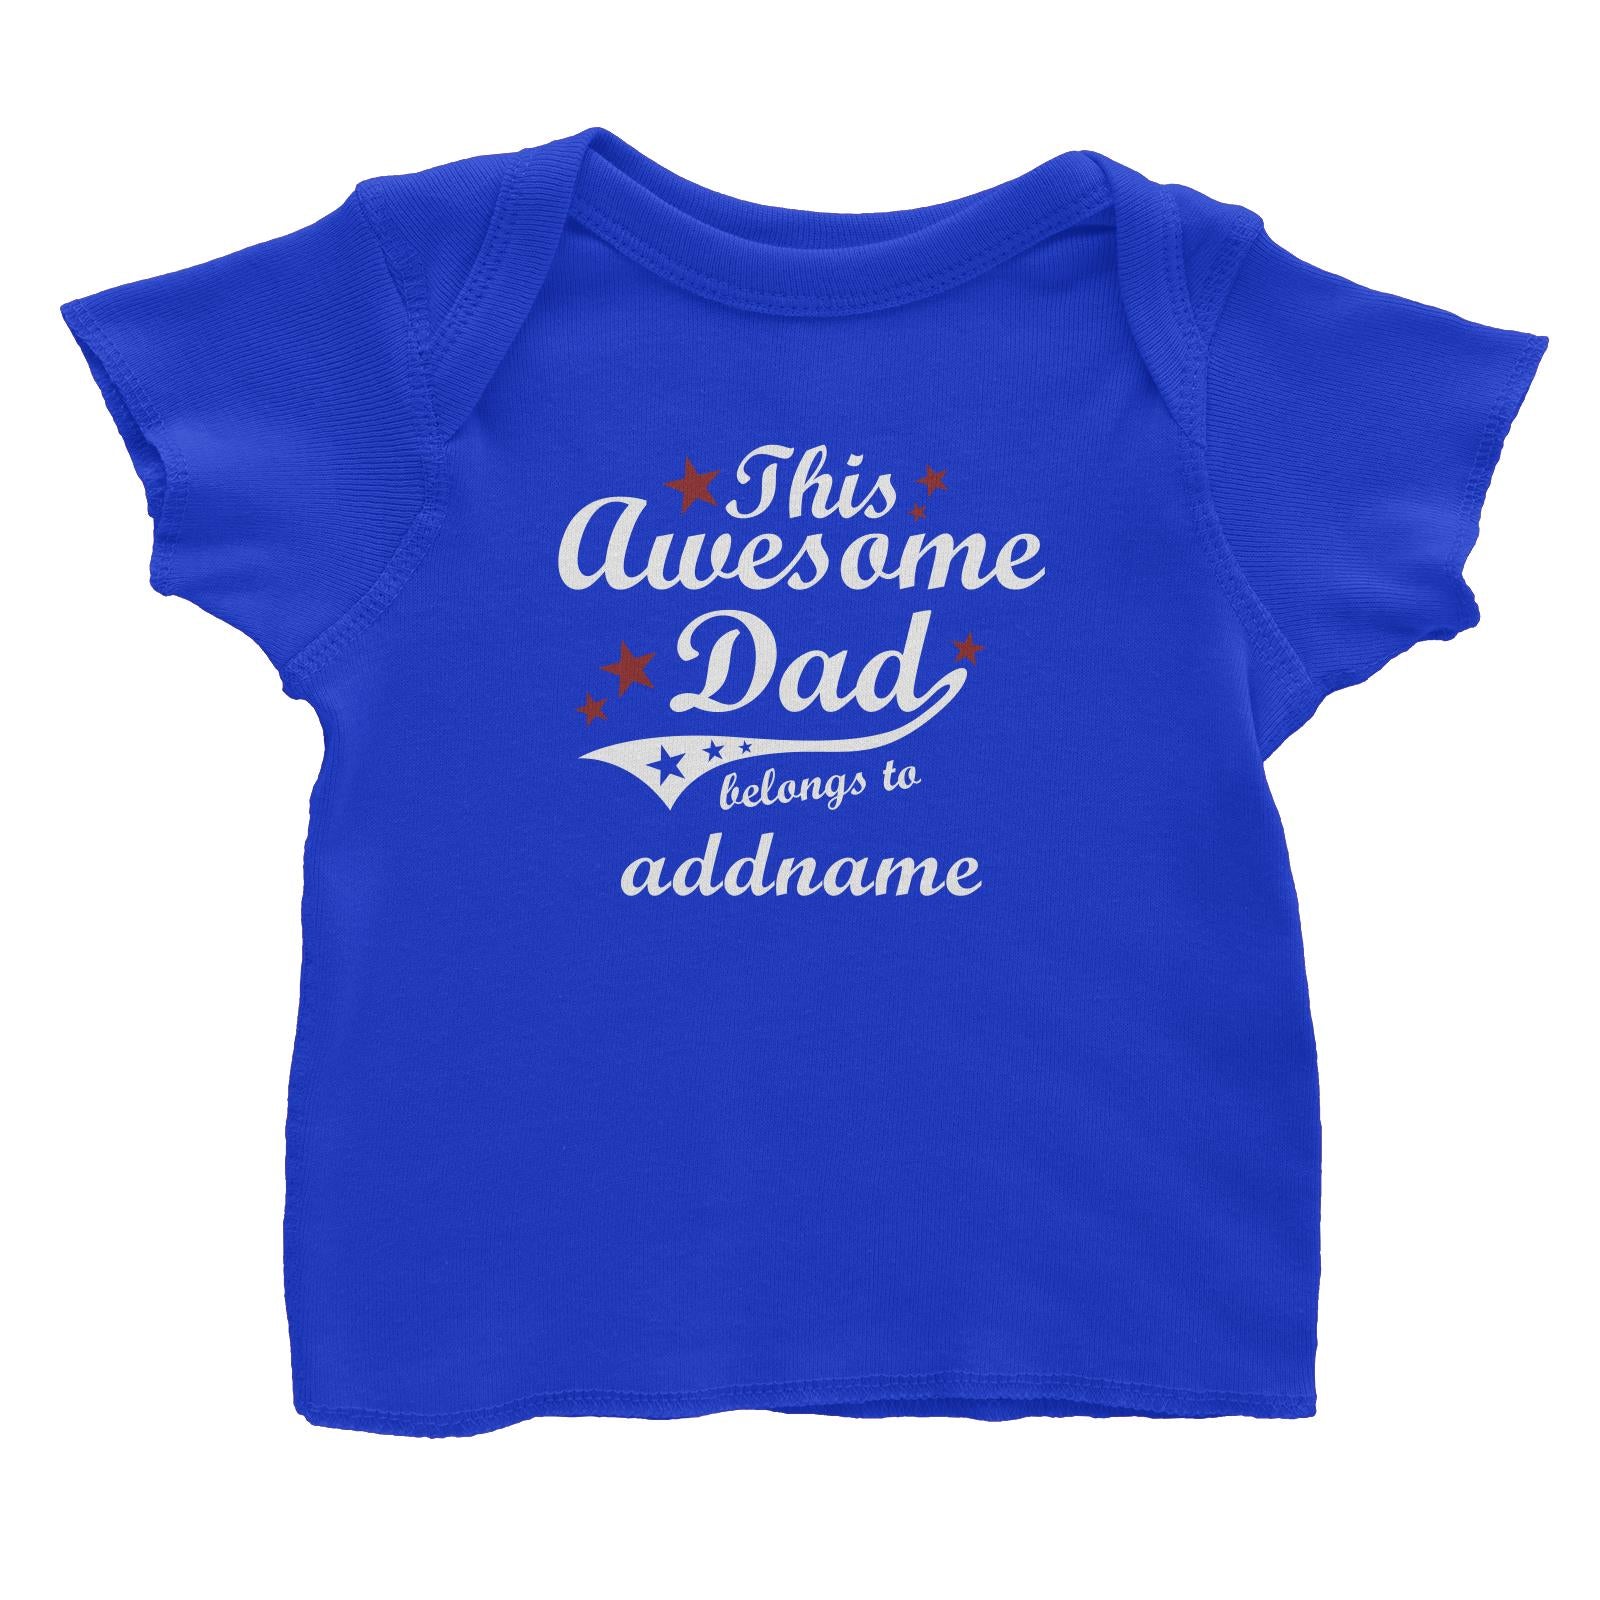 This Awesome Dad Belongs to Addname Baby T-Shirt